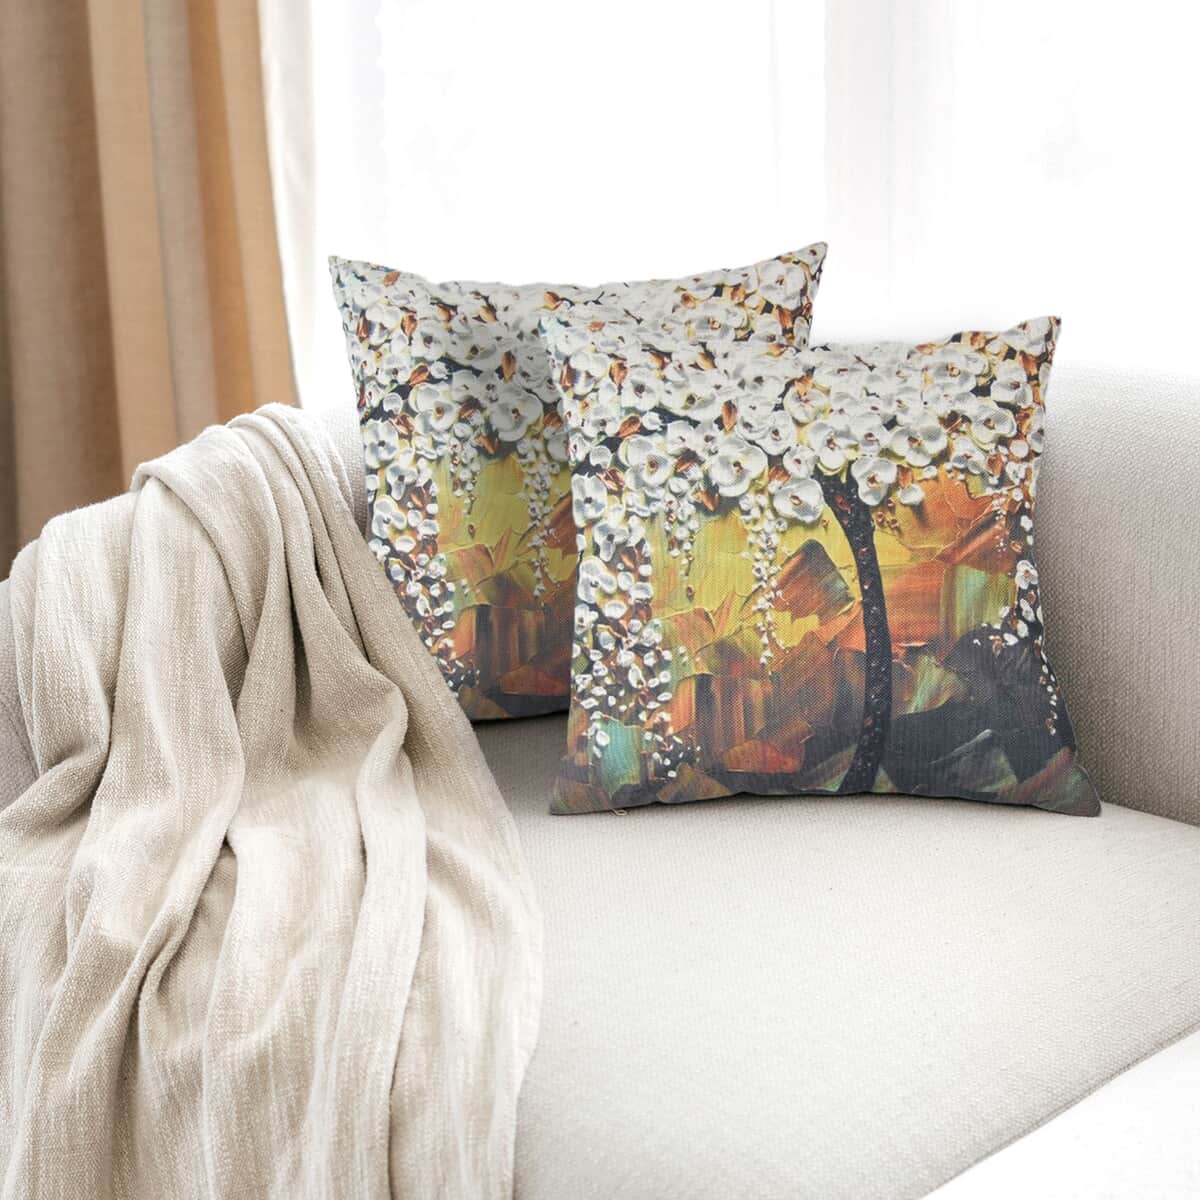 Homesmart White & Yellow Floral Tree Pattern 100% Polyester Cushion Cover Set of 2, Wrinkle Resistant Ultra Soft Cushion Cover Set with Zipper Closure image number 0